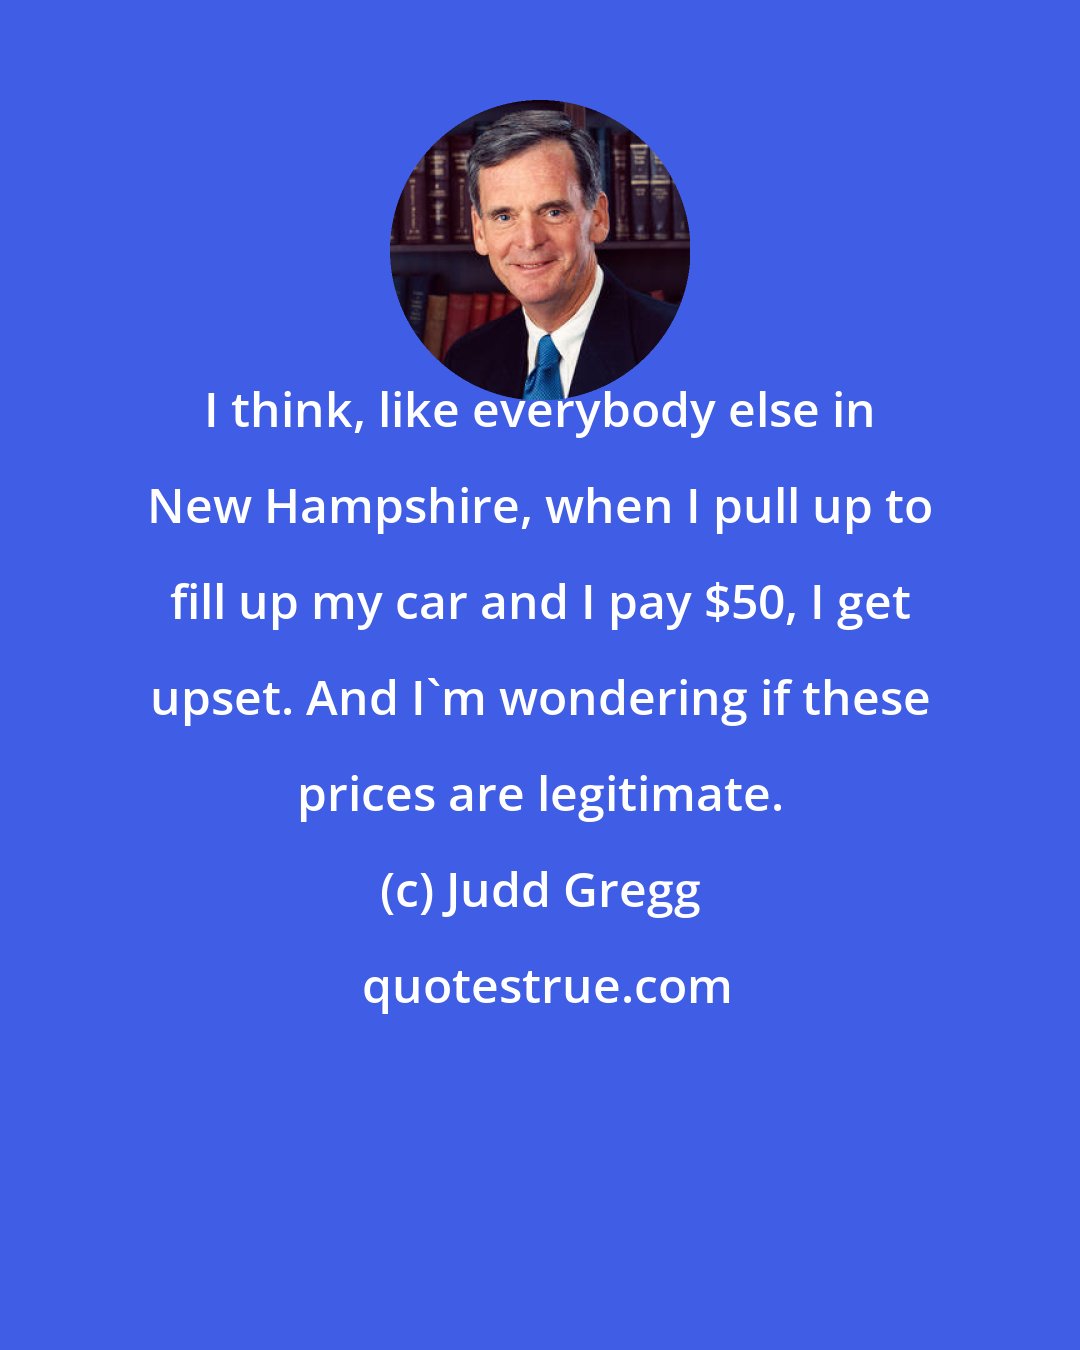 Judd Gregg: I think, like everybody else in New Hampshire, when I pull up to fill up my car and I pay $50, I get upset. And I'm wondering if these prices are legitimate.